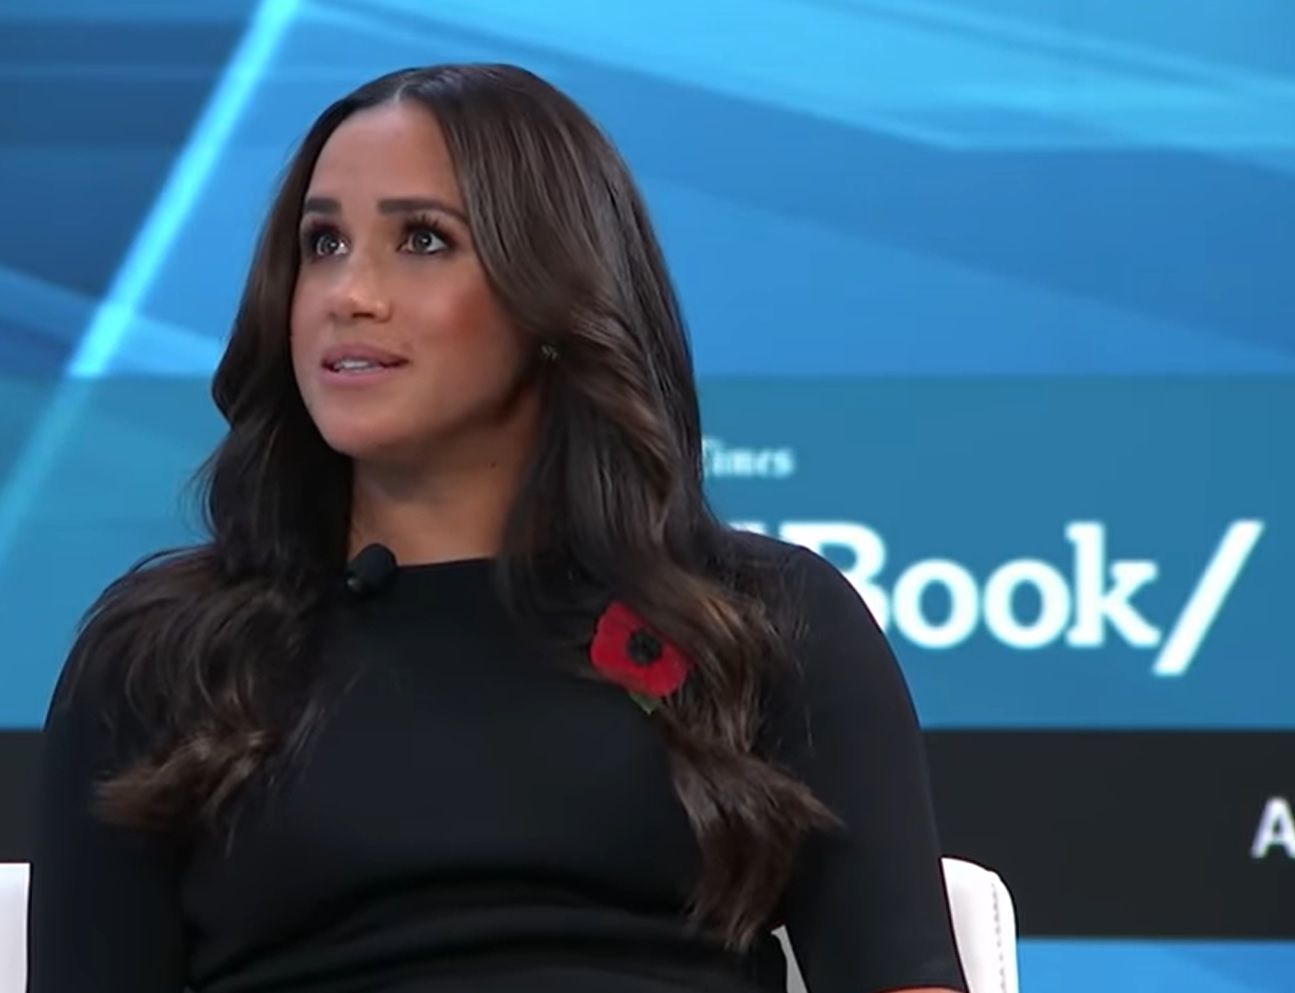 meghan-markle-shock-duchess-half-sister-samantha-markle-files-lawsuit-for-75k-plus-damages-over-her-interview-with-oprah-winfrey